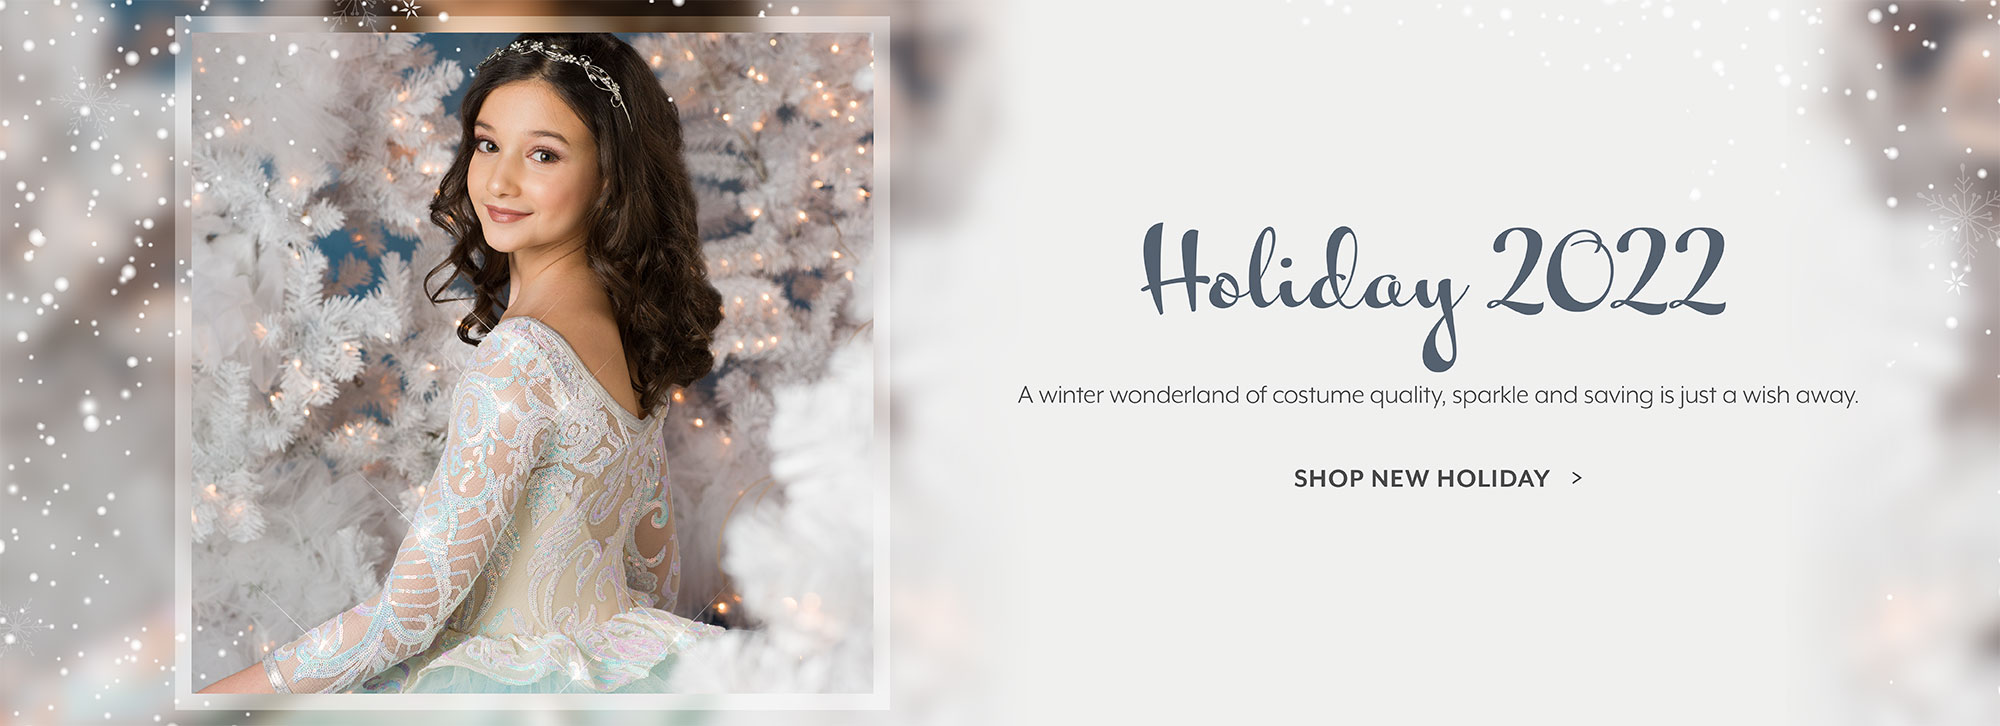 Shop new holiday costumes!